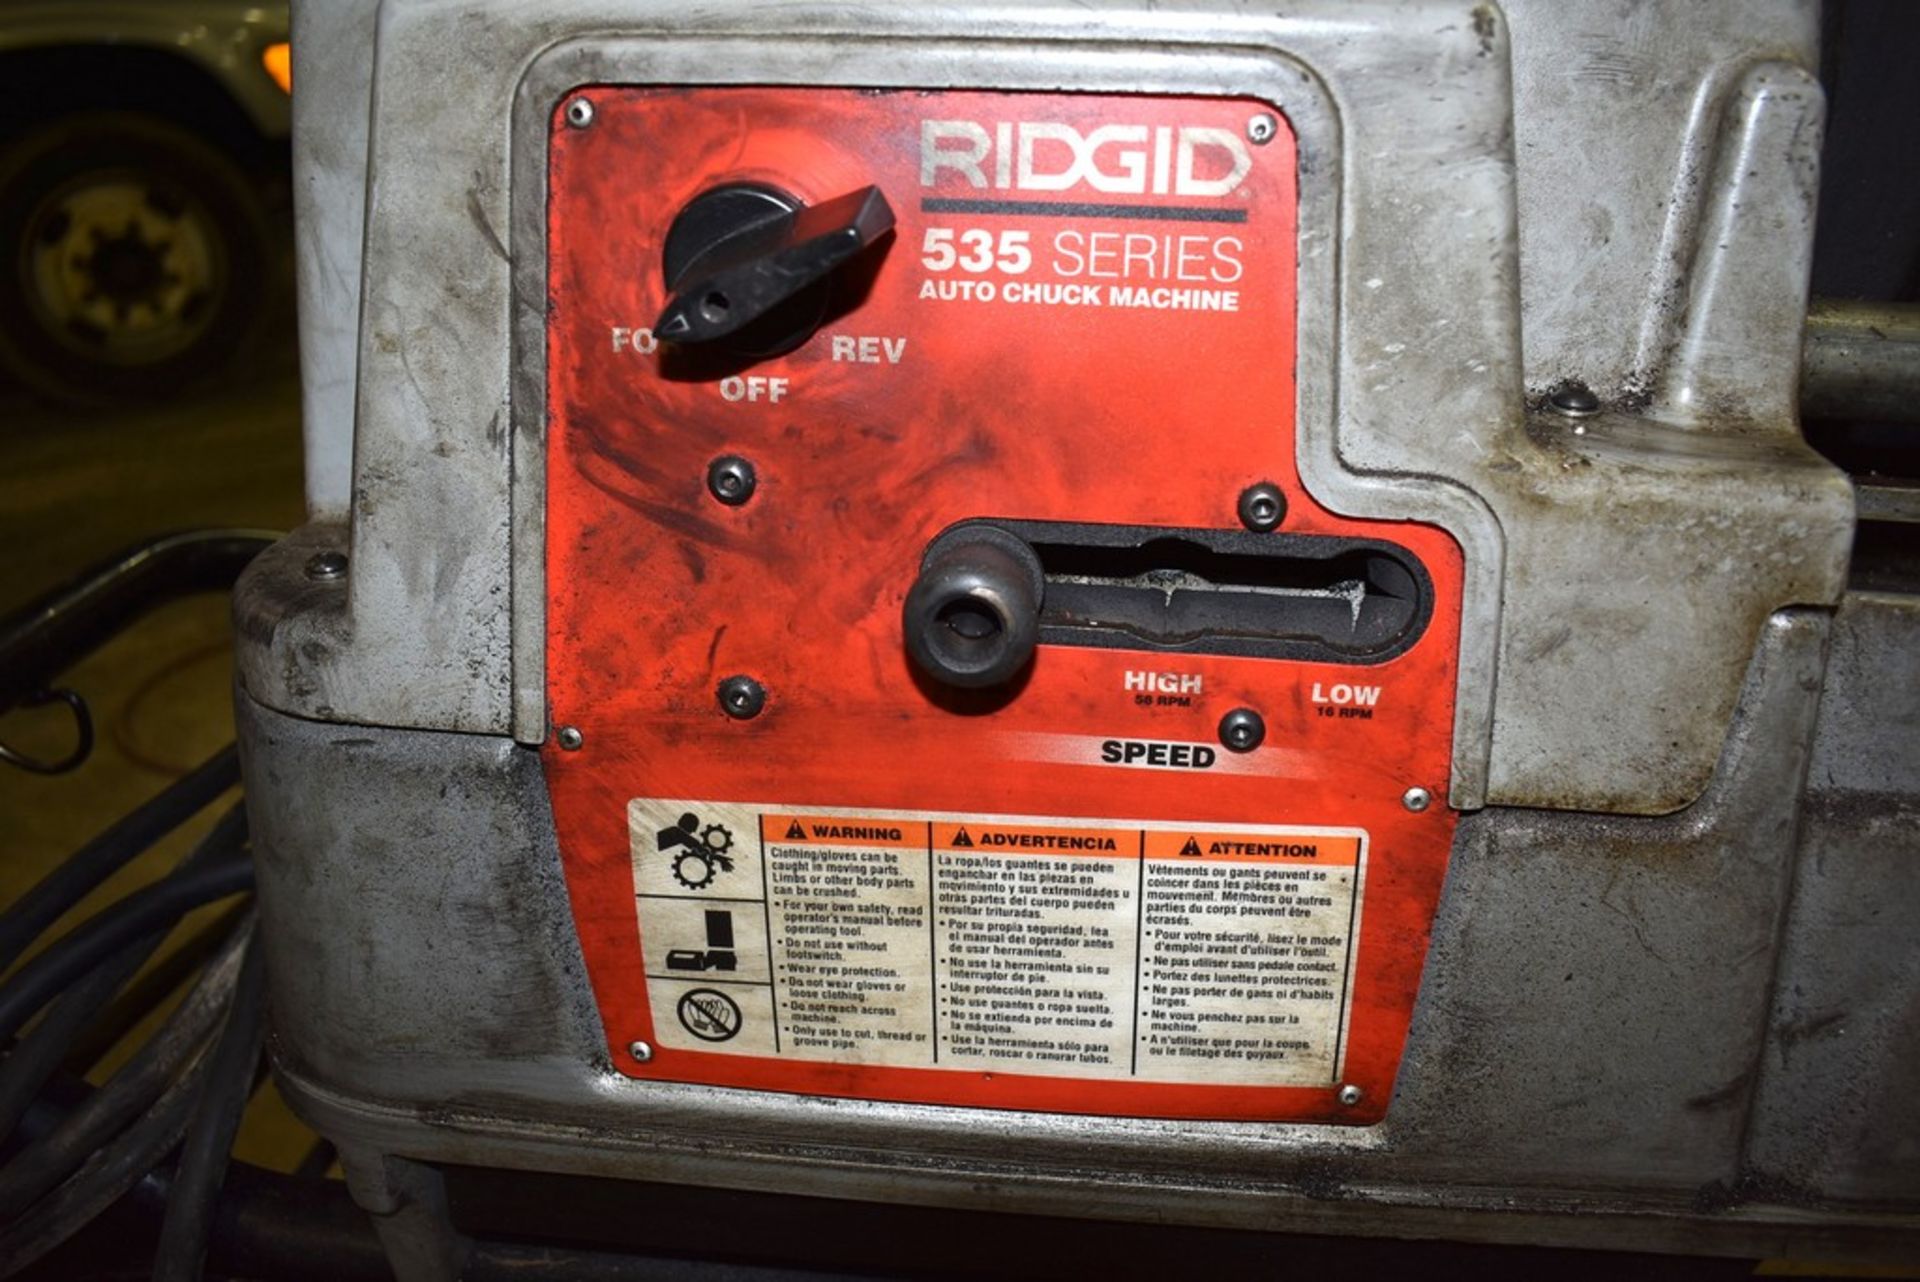 Ridgid Model 535A Auto Chuck Power Pipe Threader, Serial Number: EBC01045FO1, Ridgid 1/8" to 2" Pipe - Image 6 of 6